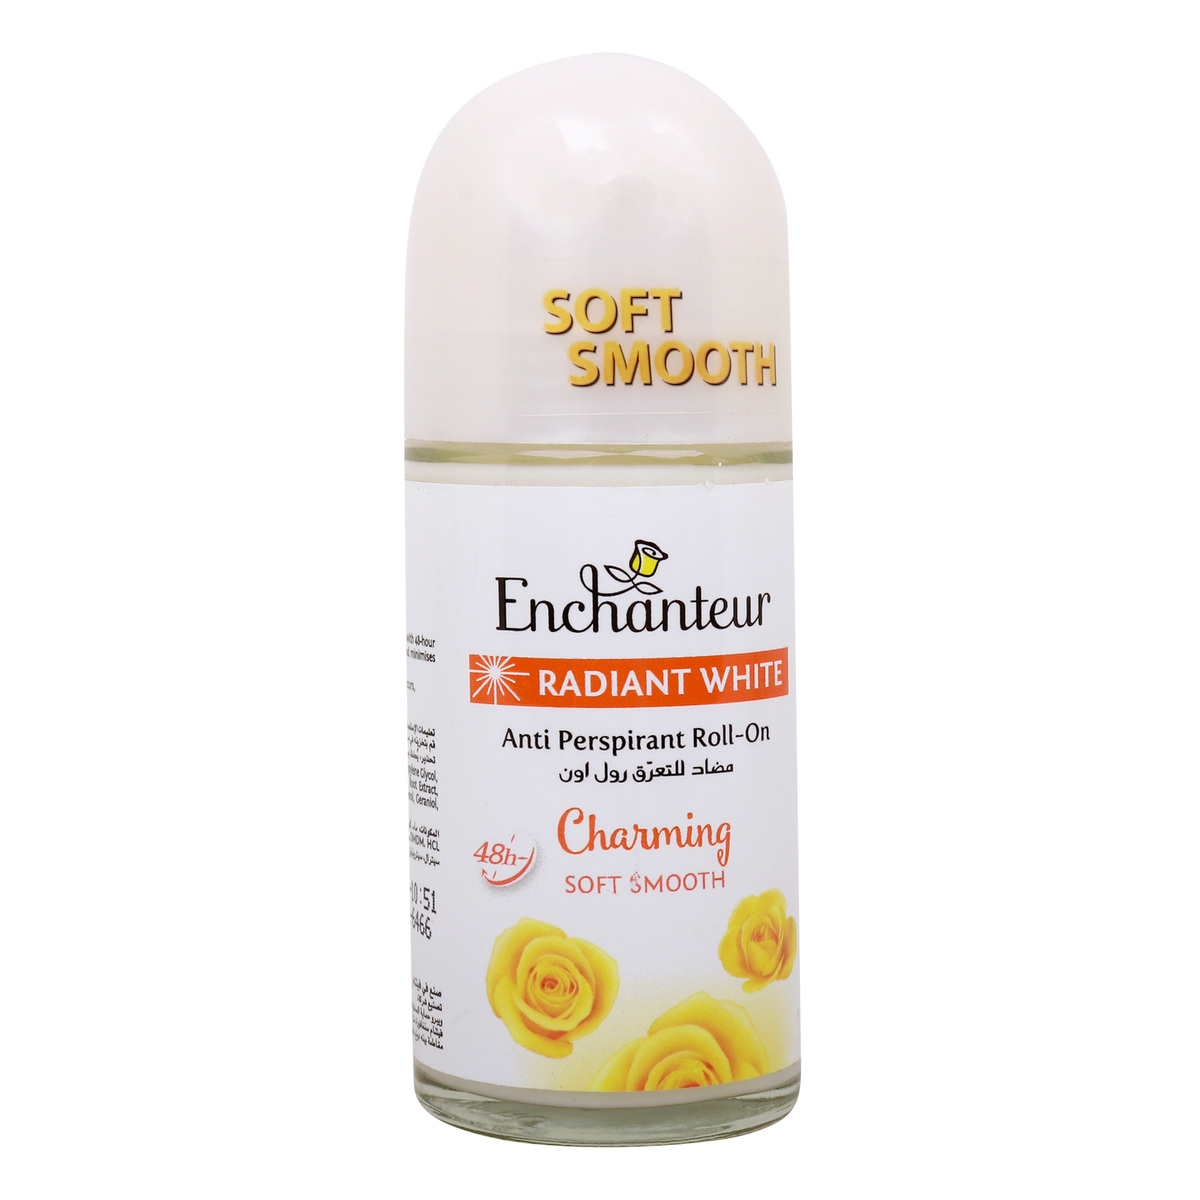 Enchanteur Charming Soft Smooth Anti-Perspirant Roll-On, 50 ml